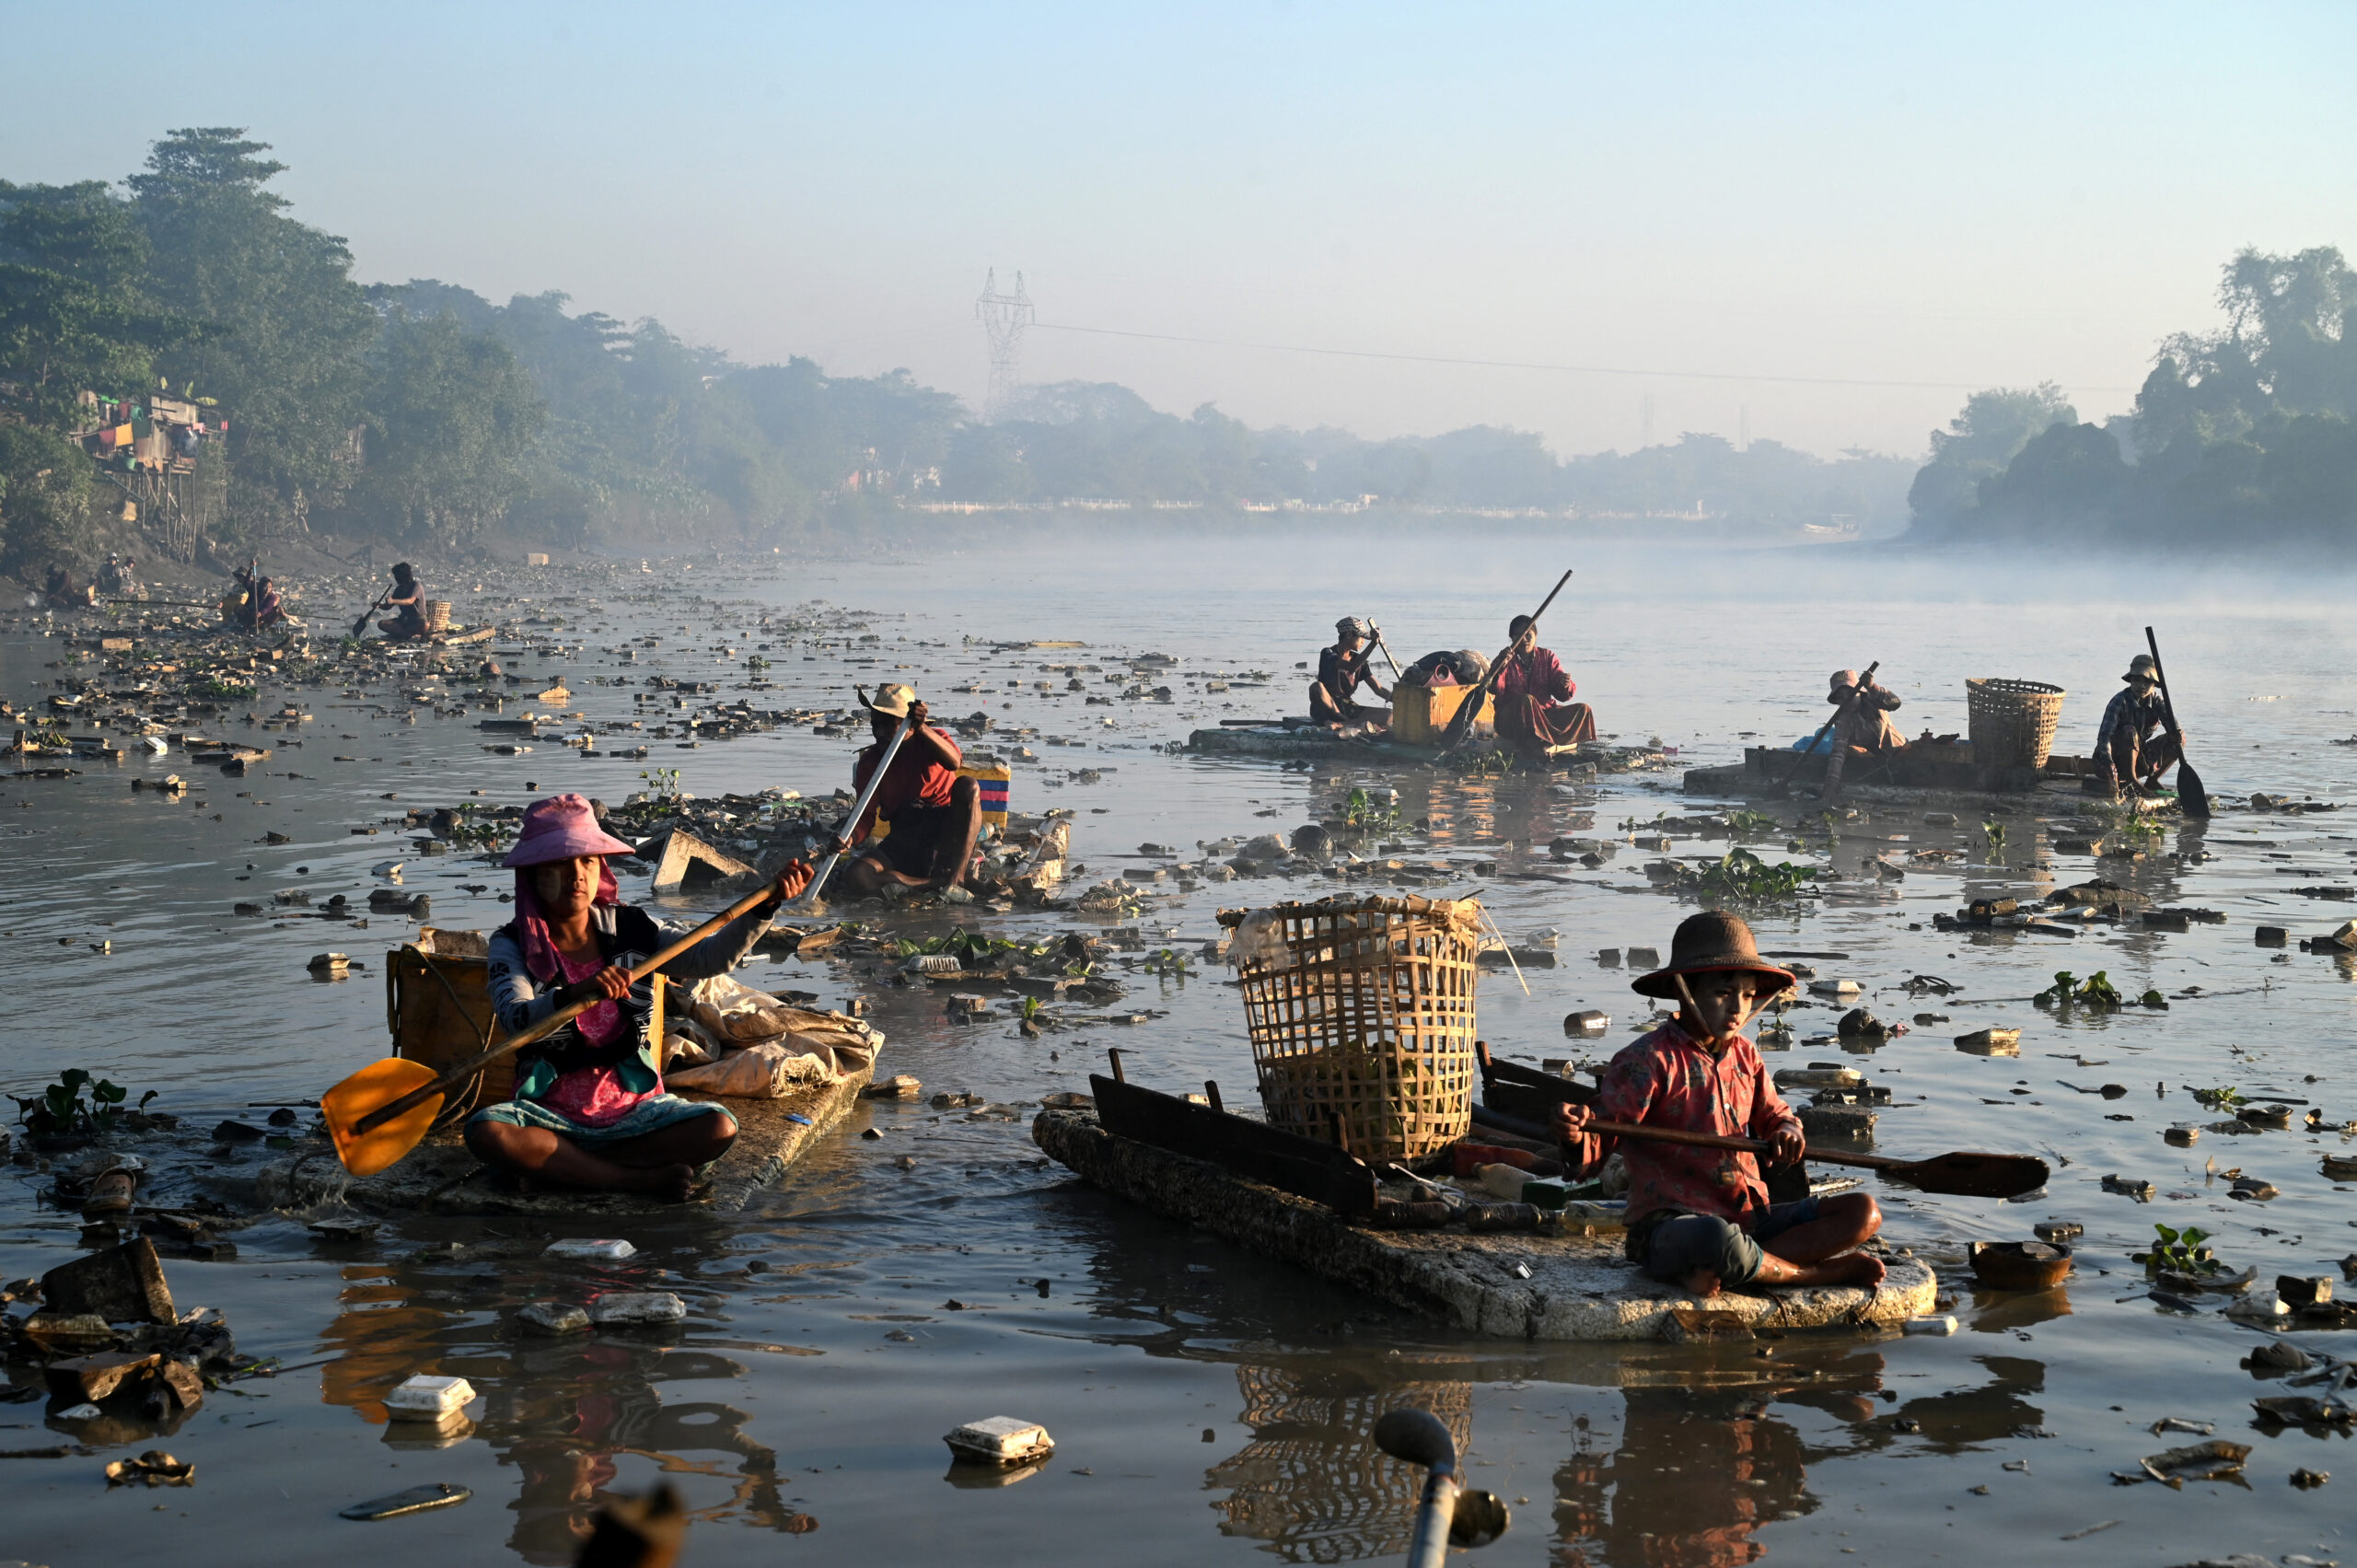 Waste collectors paddle polystyrene boats while searching for plastic and glass to recycle in Pazundaung Creek in Yangon. (Sai Aung | AFP)